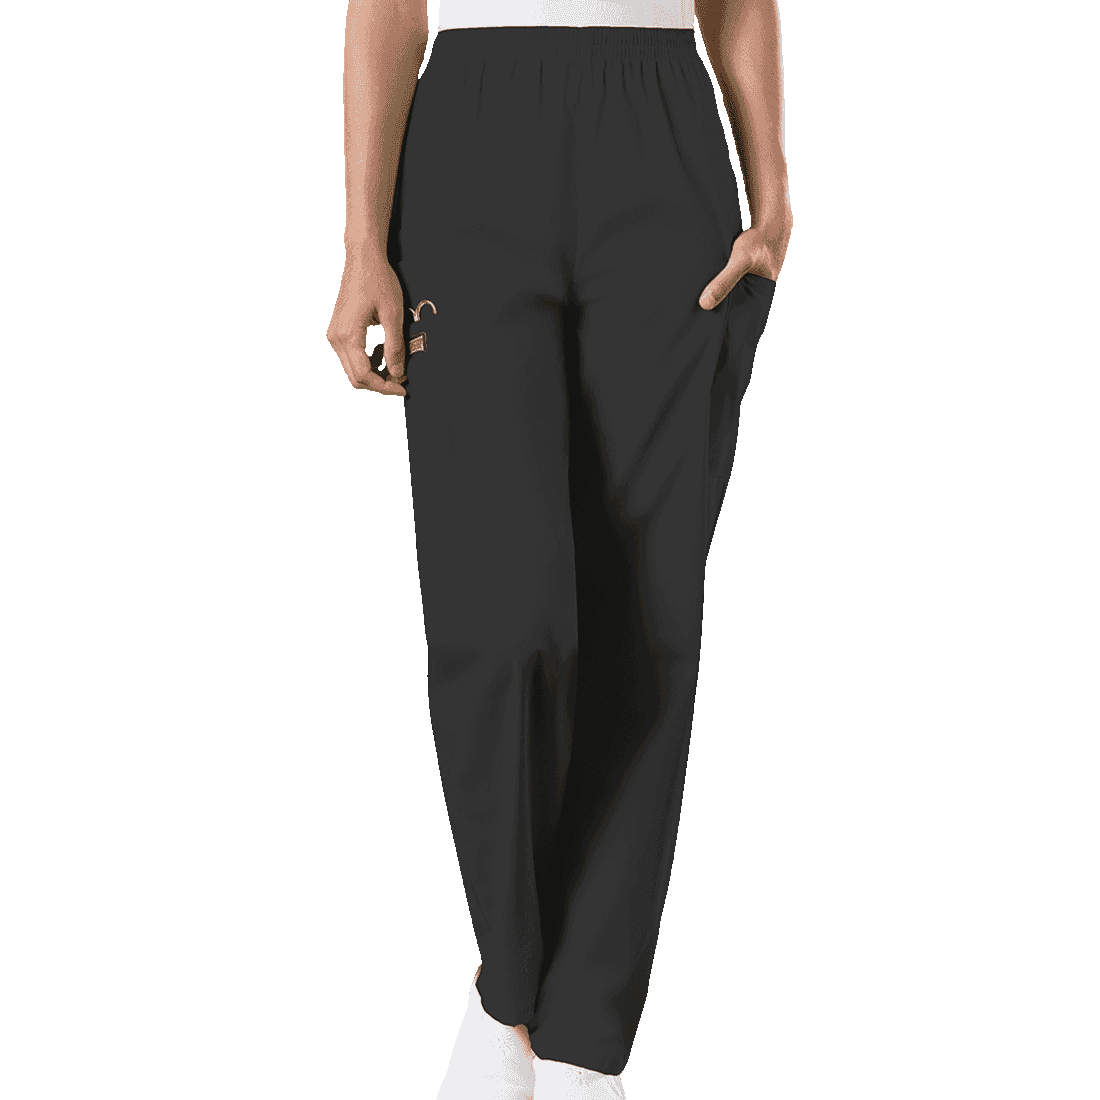 Women's Pull-On Tapered Scrub Trousers 4200 Black